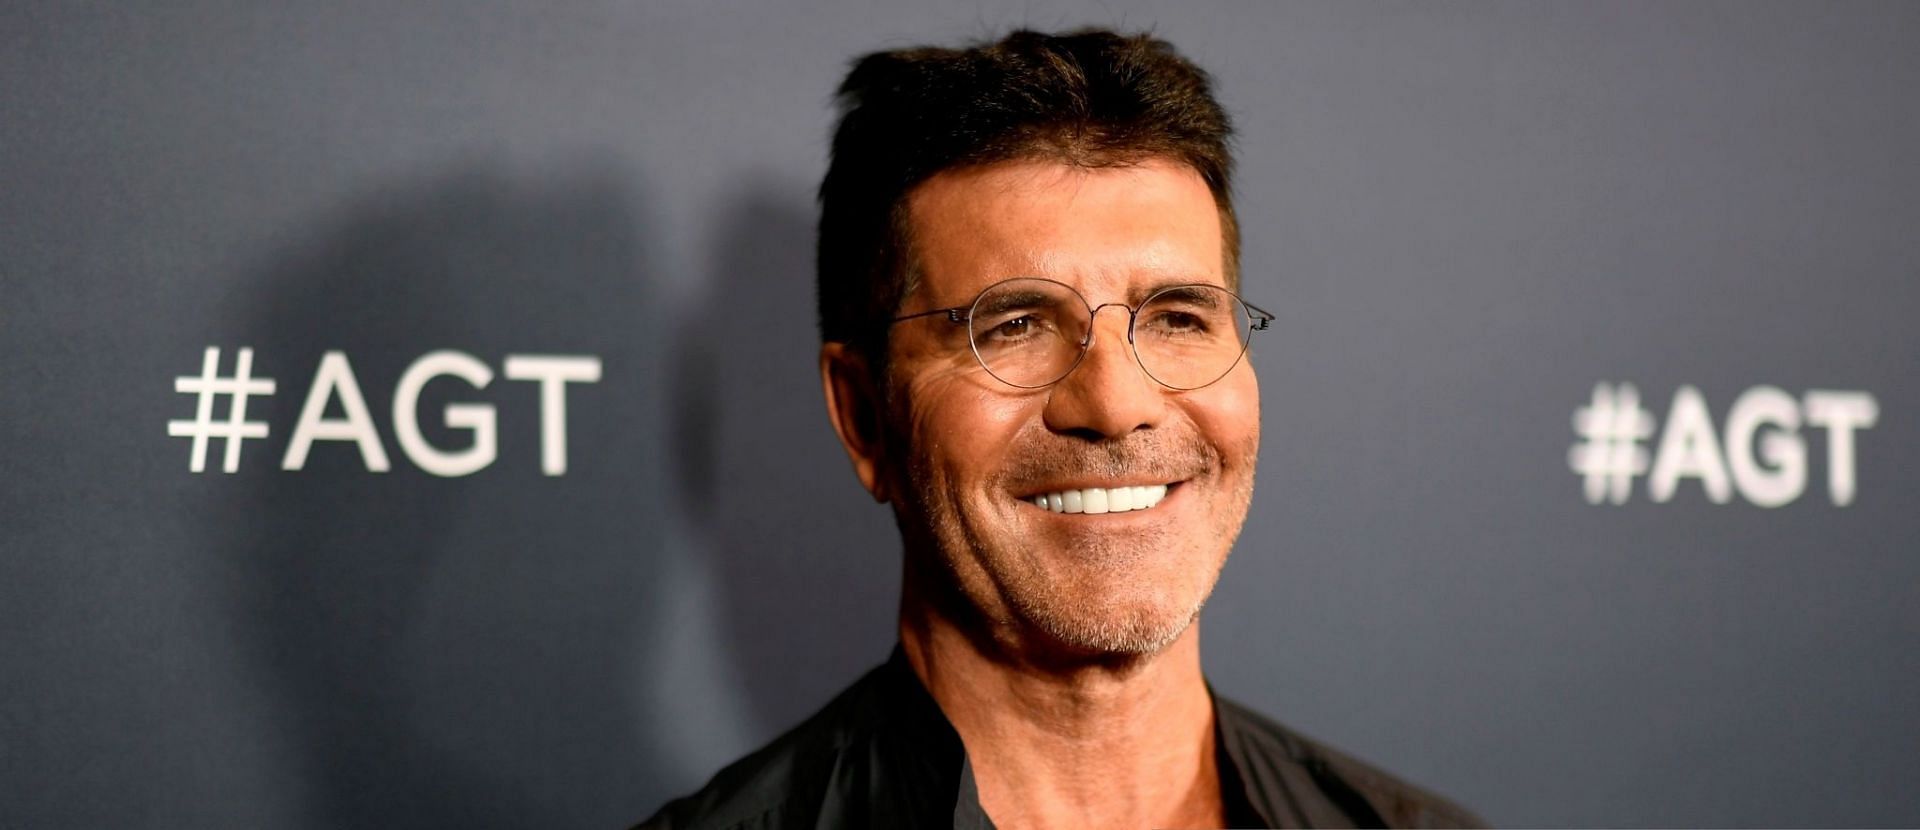 Simon Cowell reportedly had a broken arm after suffering an e-bike accident in London (Image via Frazer Harrison/Getty Images)